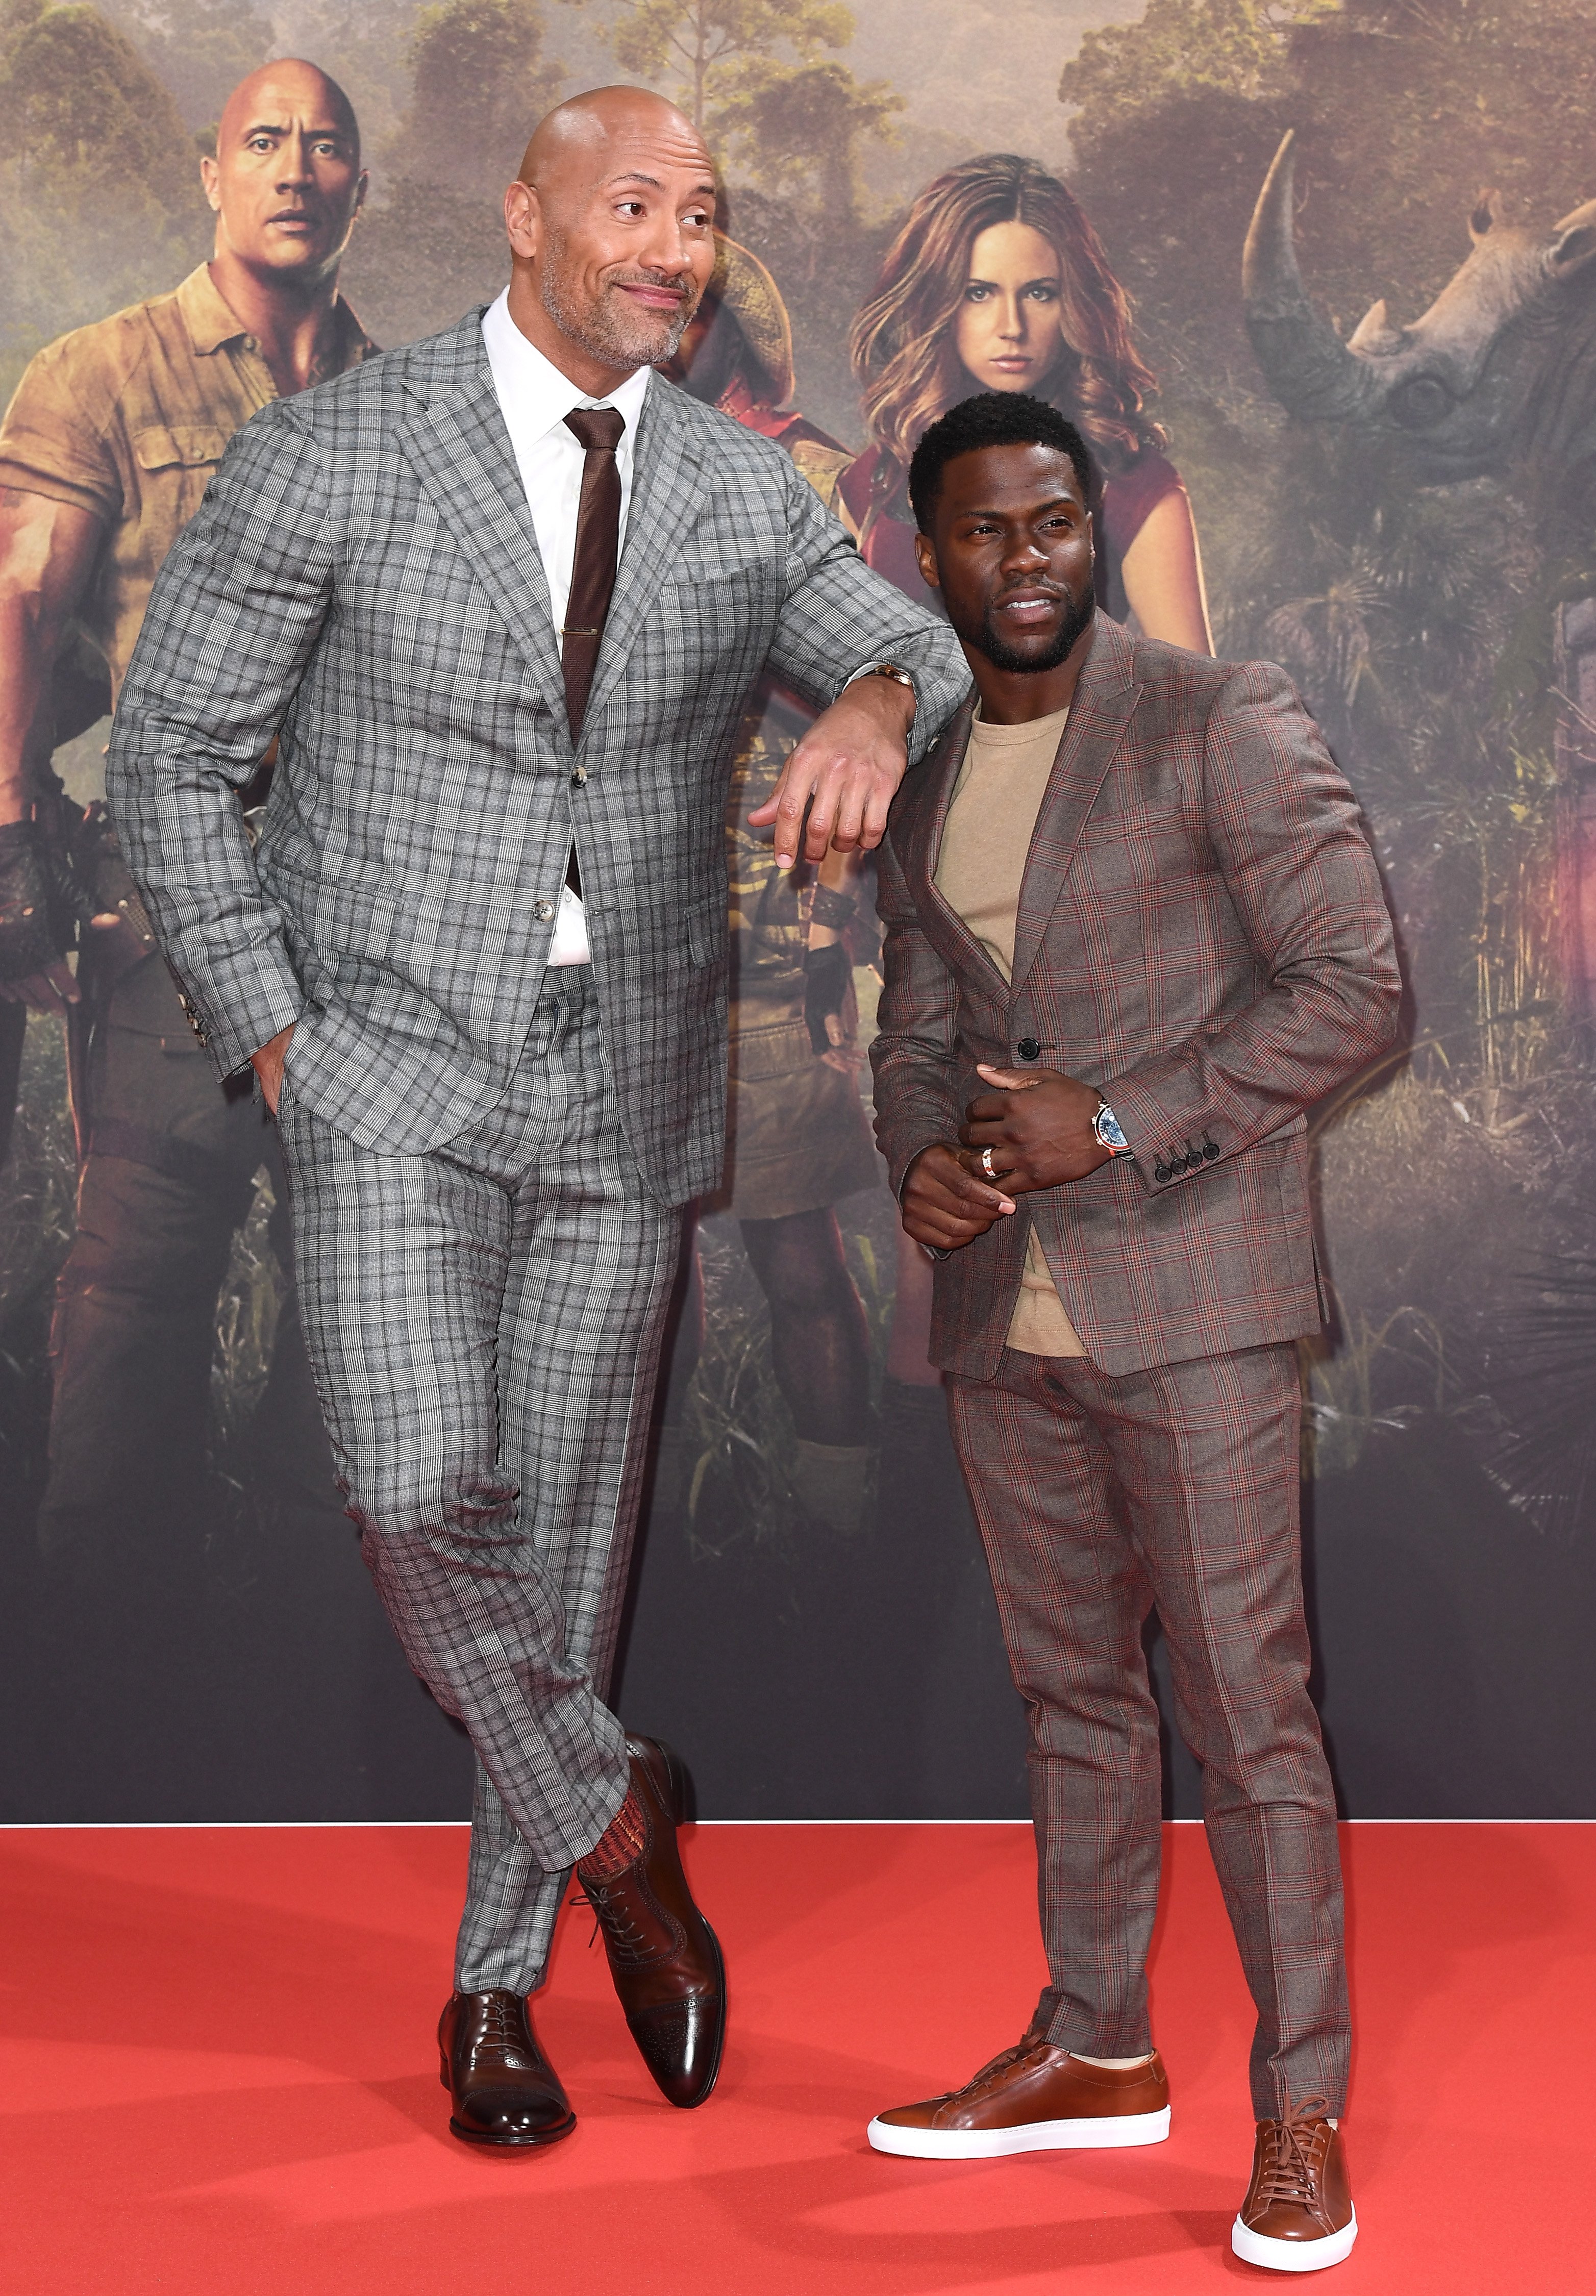 Dwayne Johnson and Kevin Hart attend the German premiere of "Jumanji" on December 6, 2017, in Berlin, Germany. | Source: Getty Images.